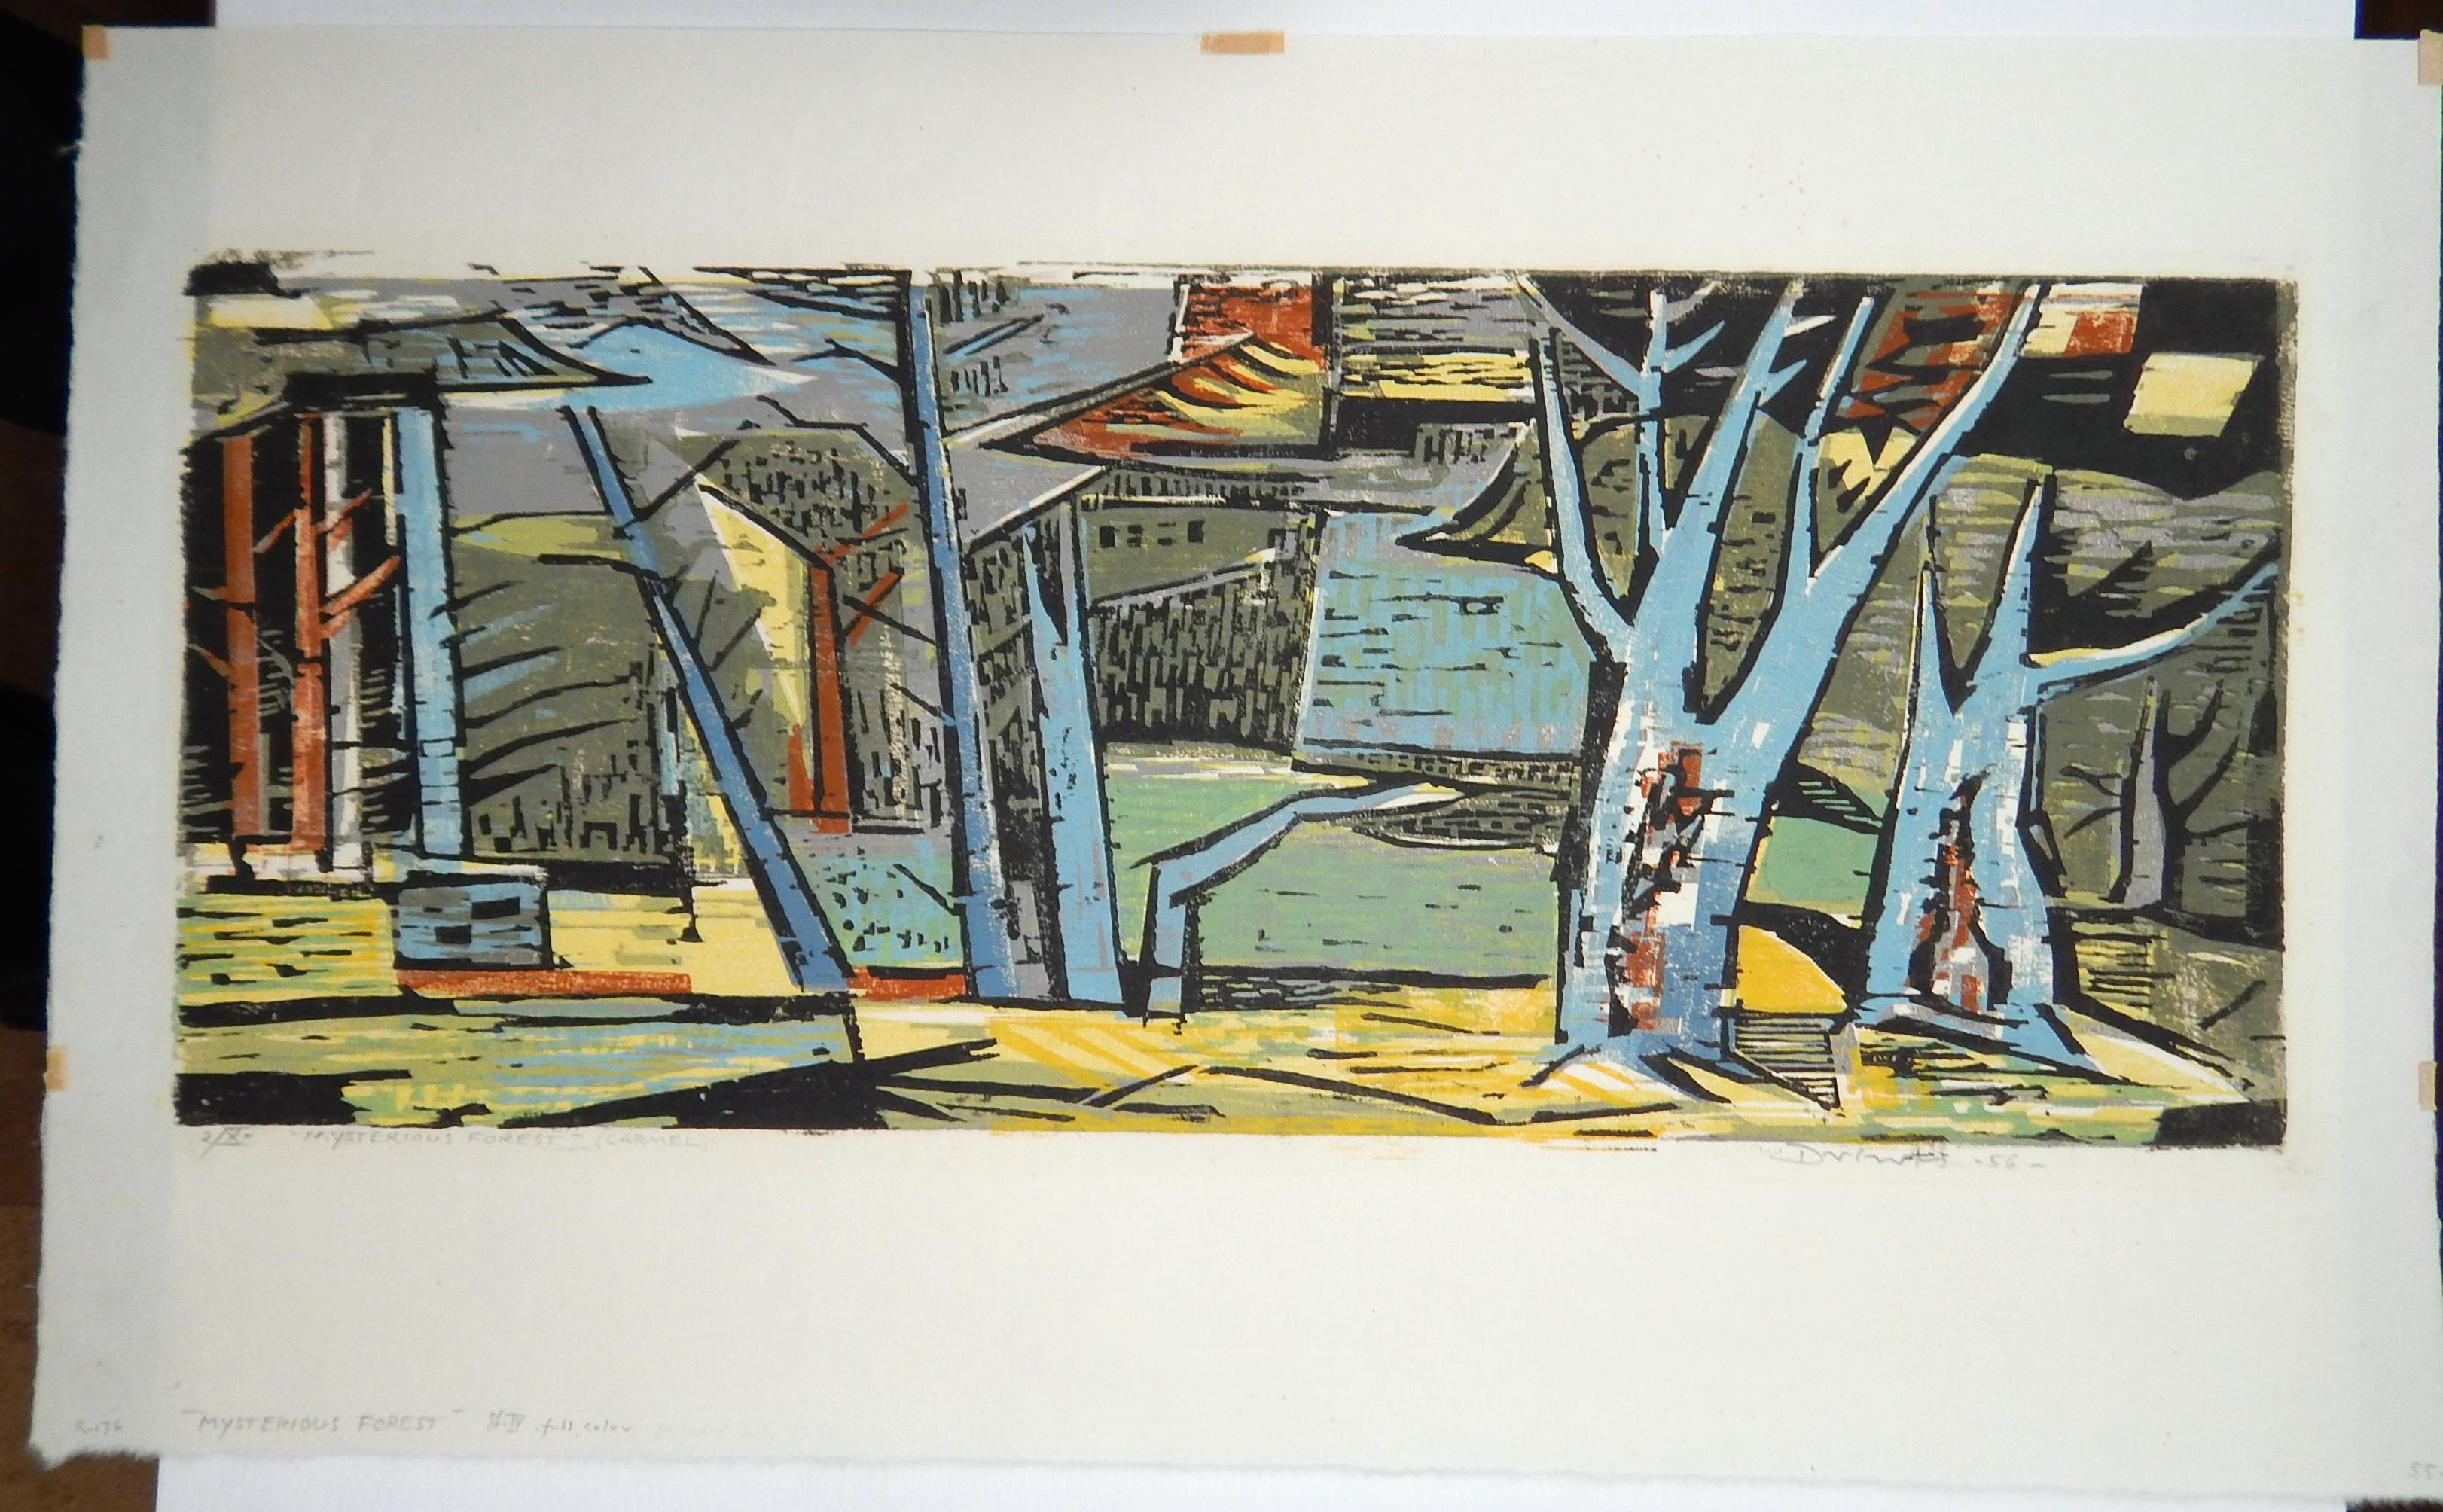 Original color woodblock print by Werner Drewes.
In excellent condition. Unframed.
Image measures: 9 3/4 x 23 3/4 inches.
Pencil signed and dated. Numbered 2/X St. IV full color.
Rose catalog #176

Werner Drewes (1899-1985)
Werner Drewes,